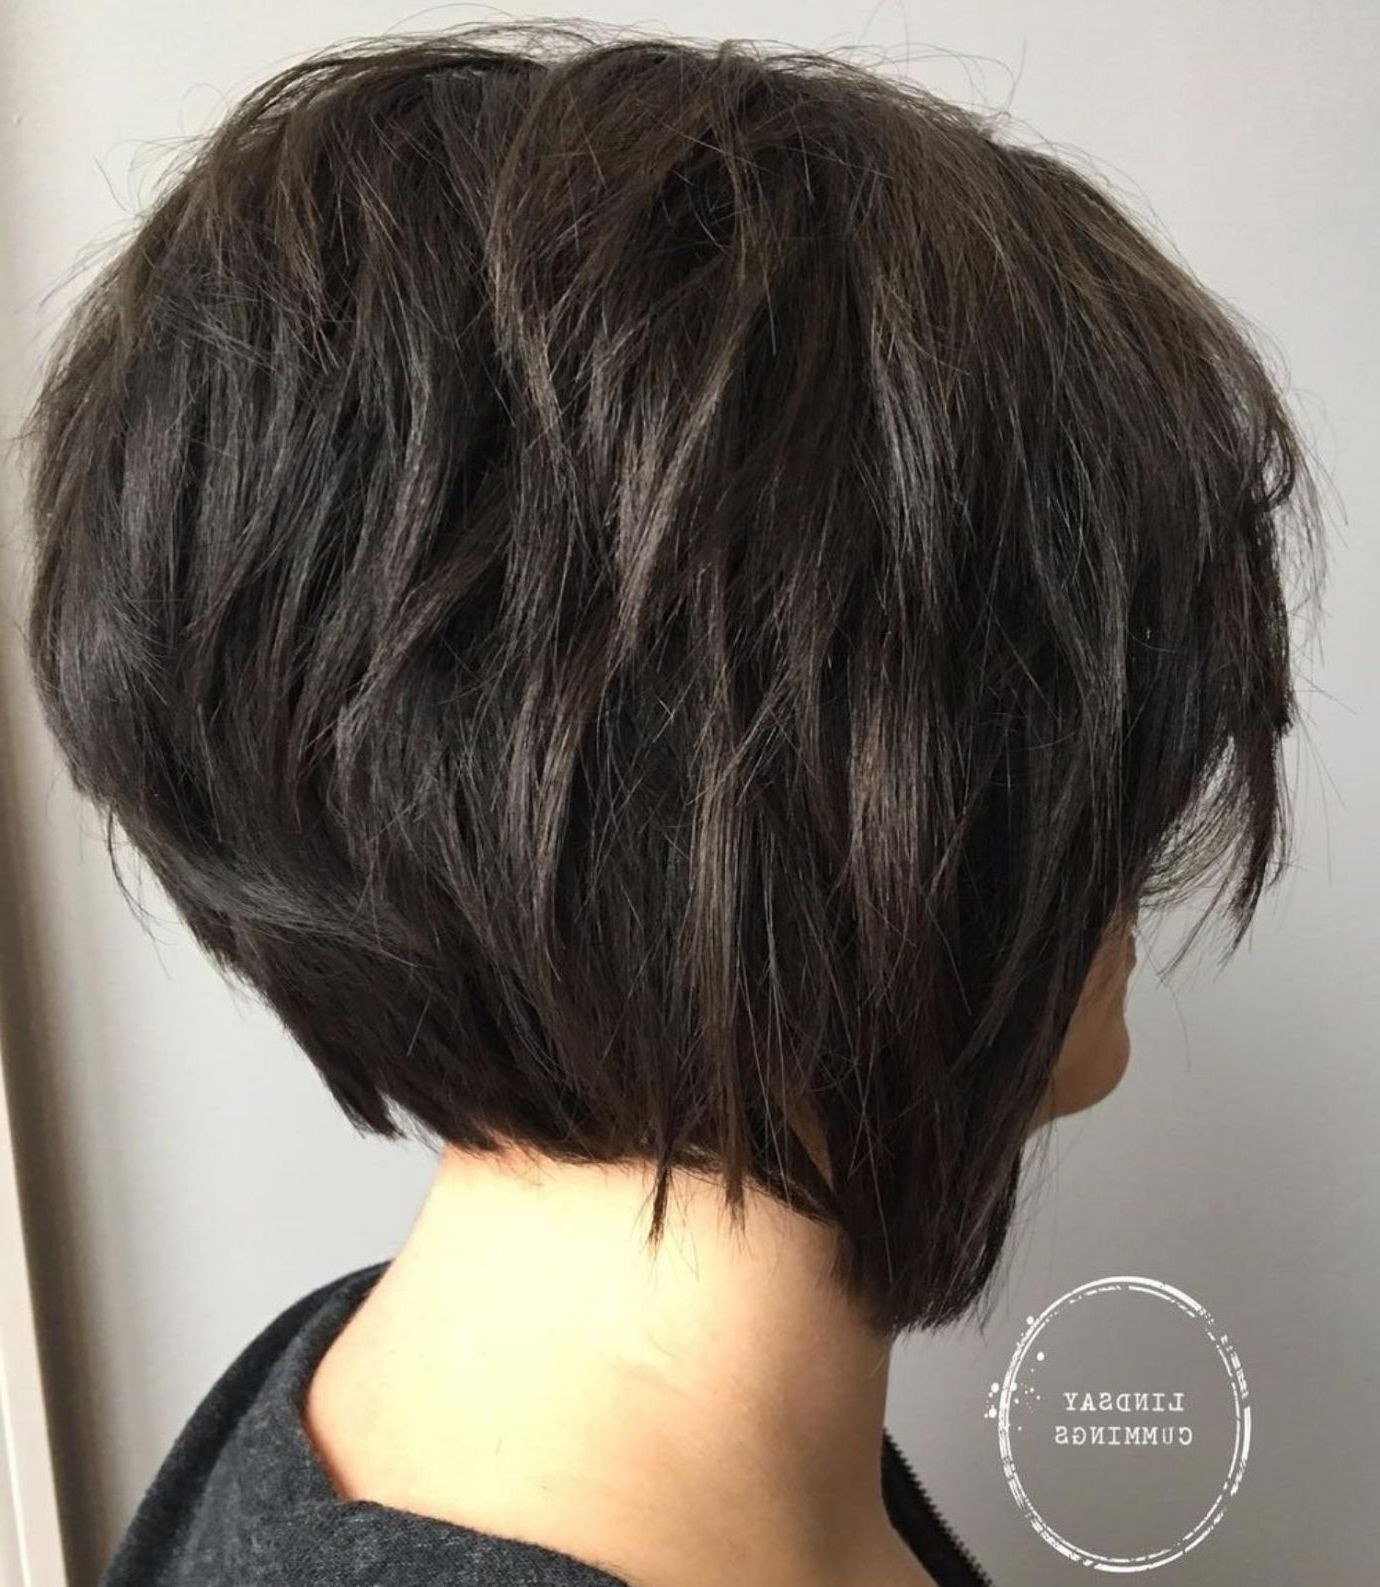 60 Short Shag Hairstyles That You Simply Can't Miss In 2019 Pertaining To Matte Shaggy Bob Hairstyles (View 3 of 20)